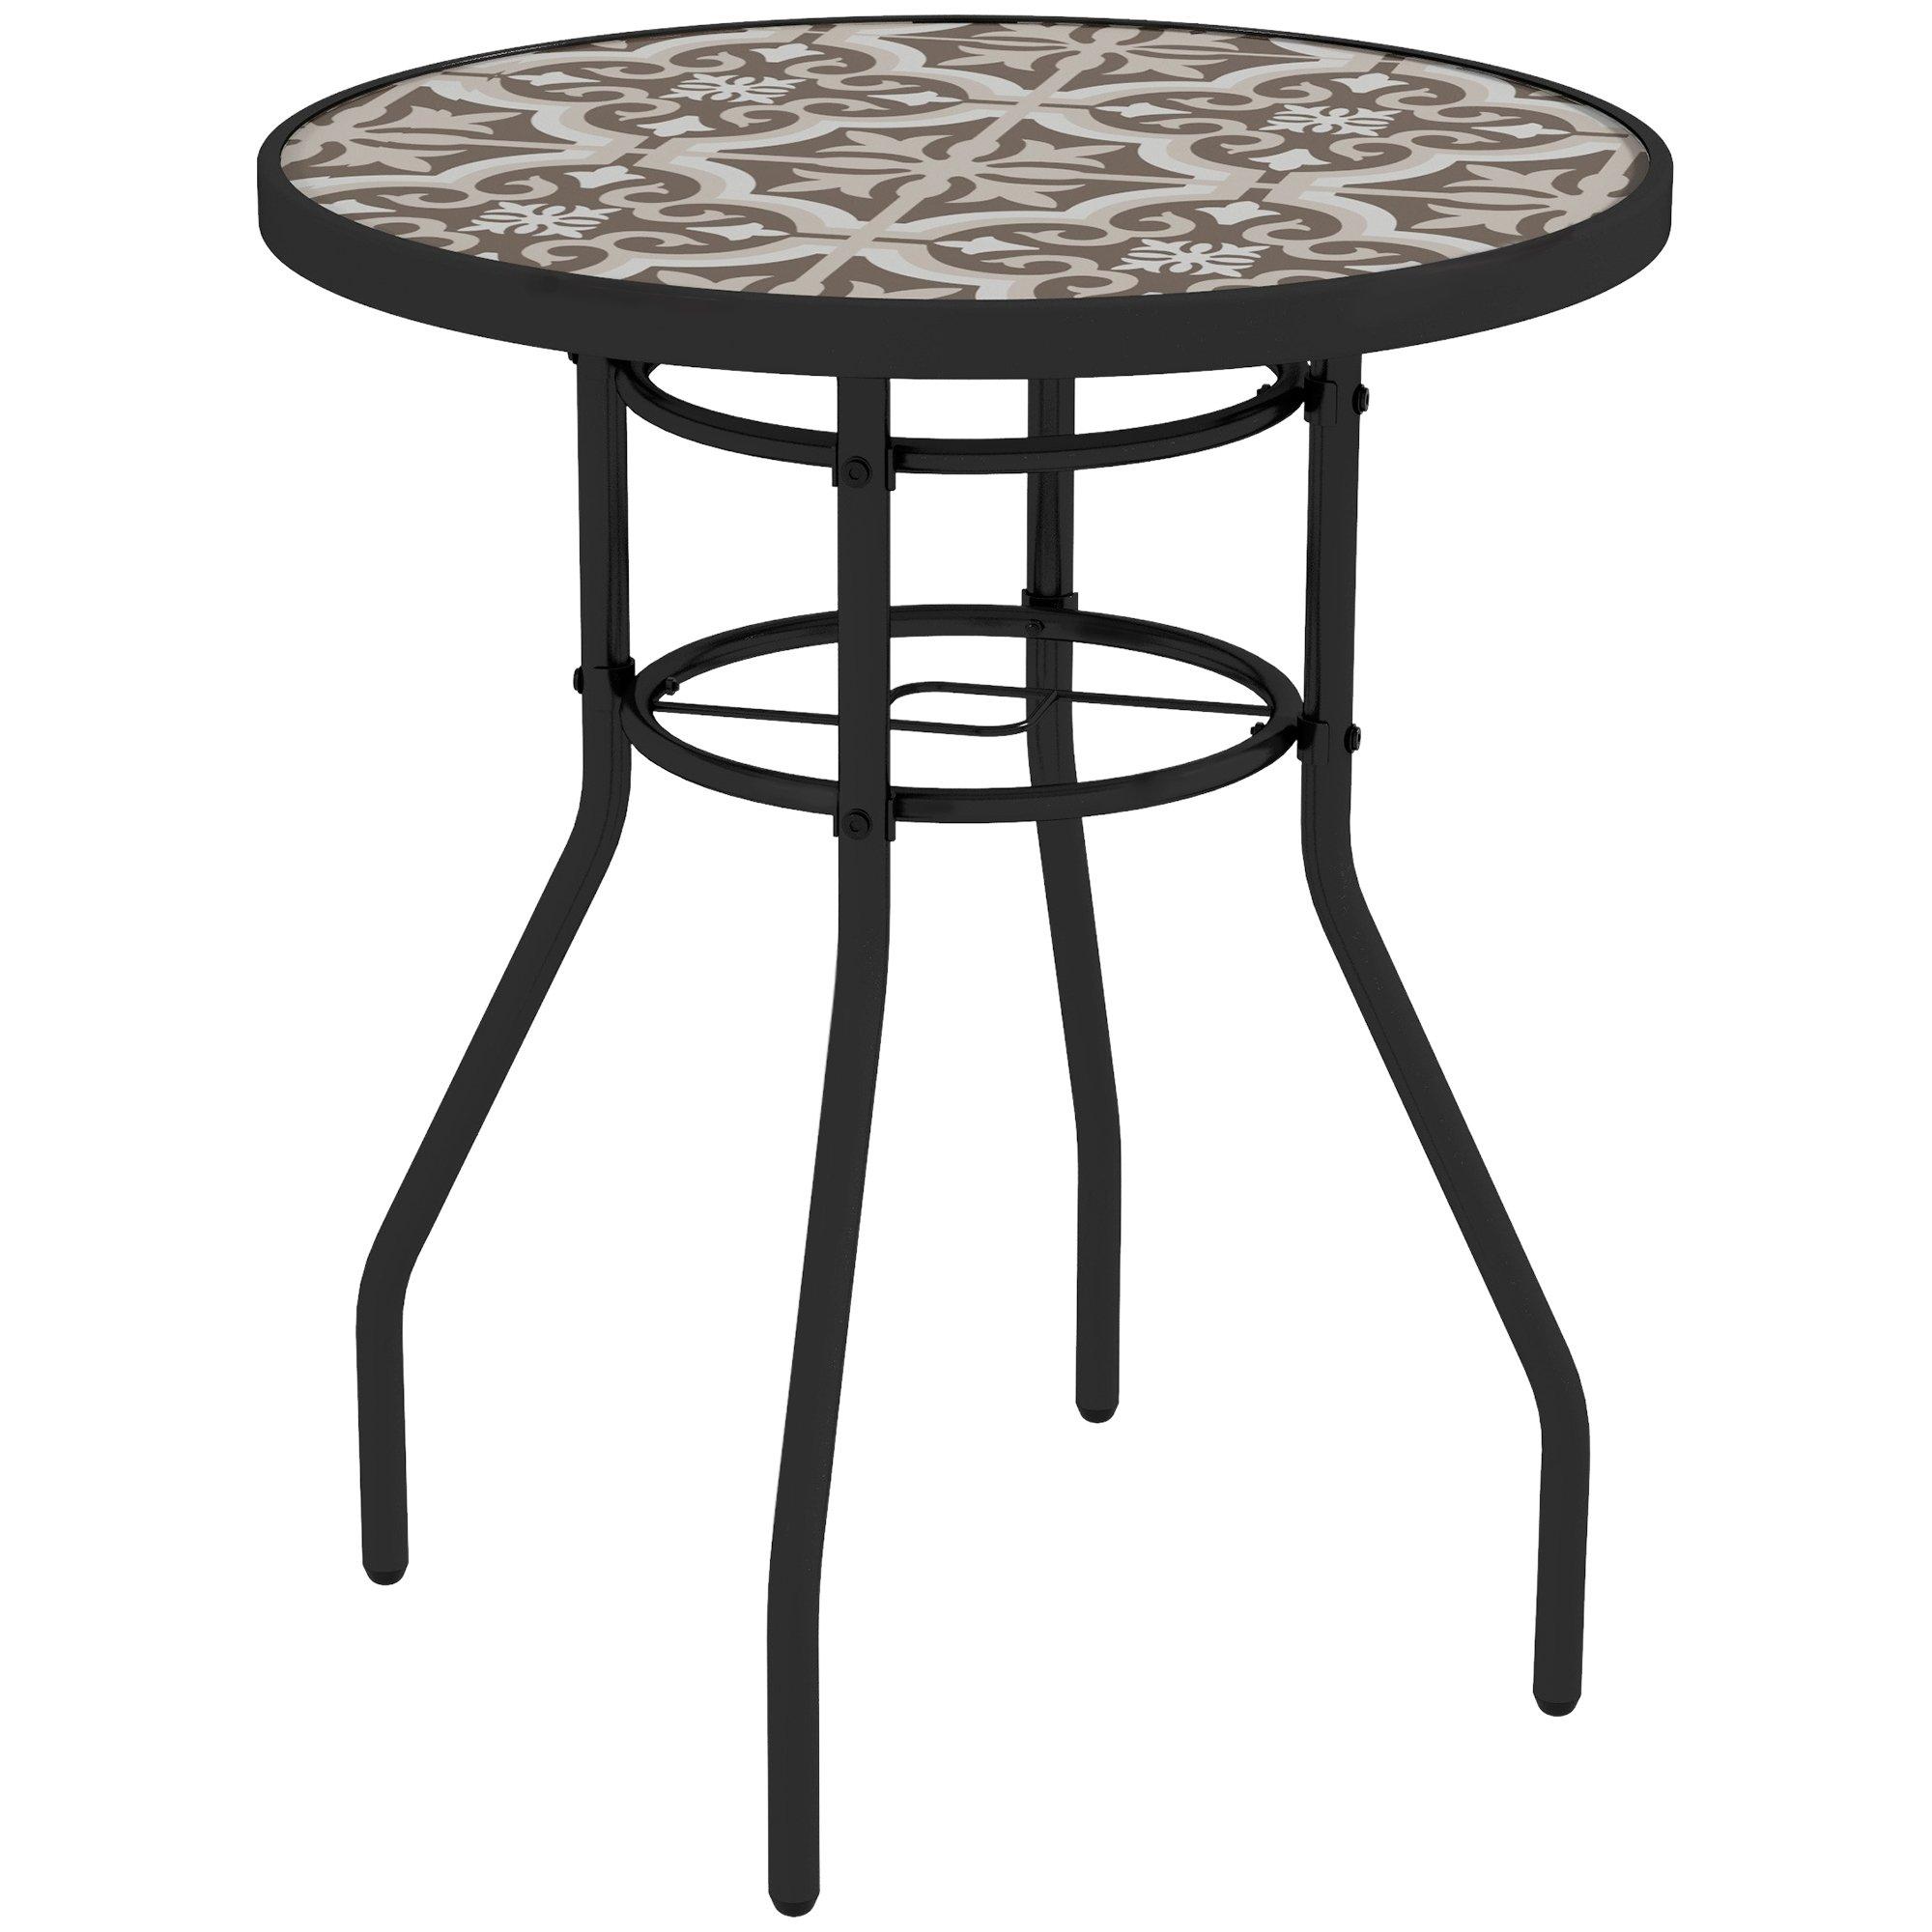 Garden Table with Glass Printed Design for Outdoor